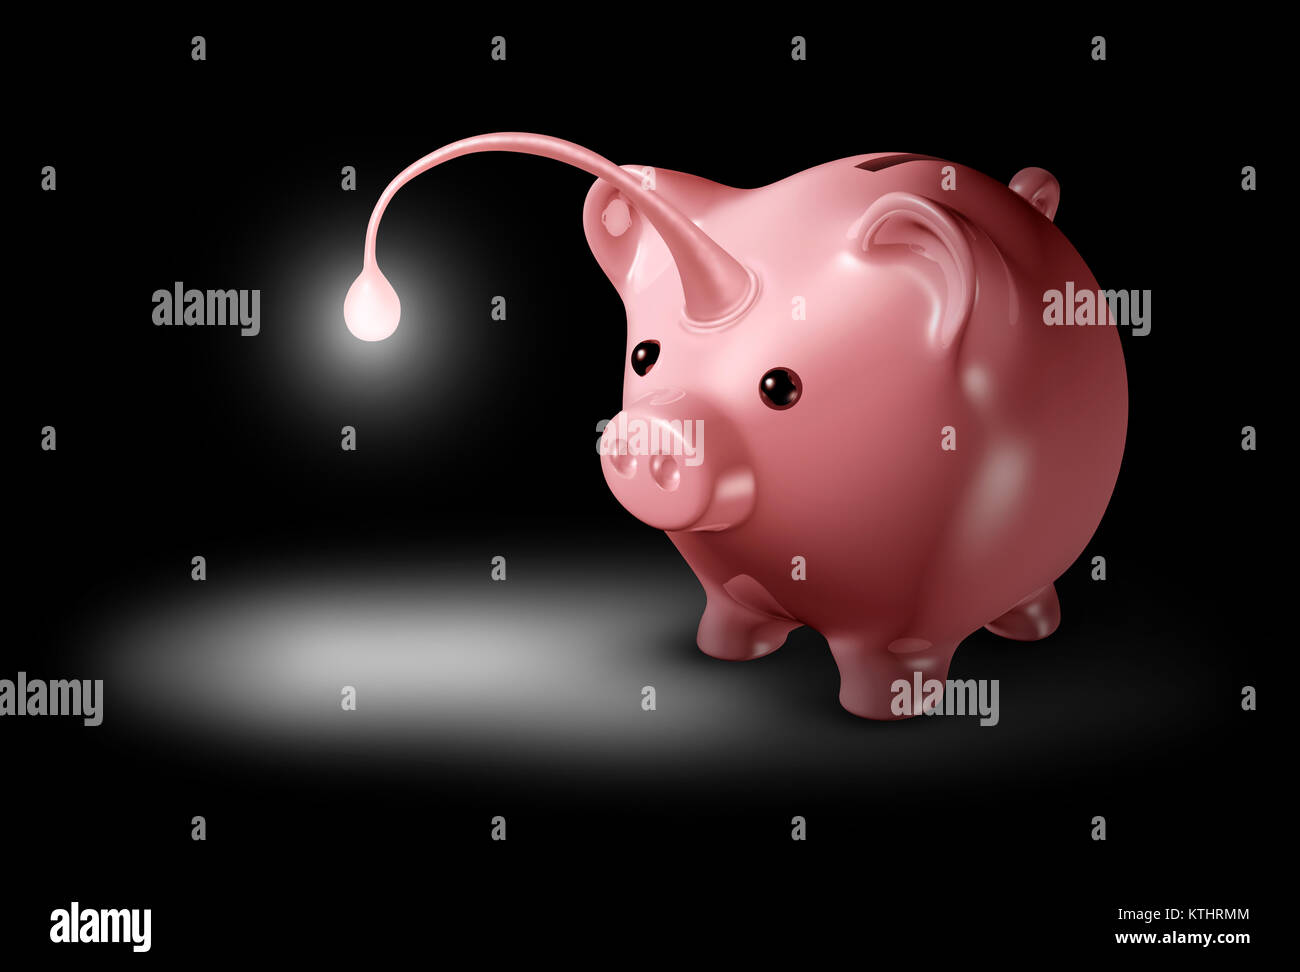 Attract investment concept and luring money to invest as a cunning piggy bank shaped as an angler fish with a light lure to promote profit. Stock Photo